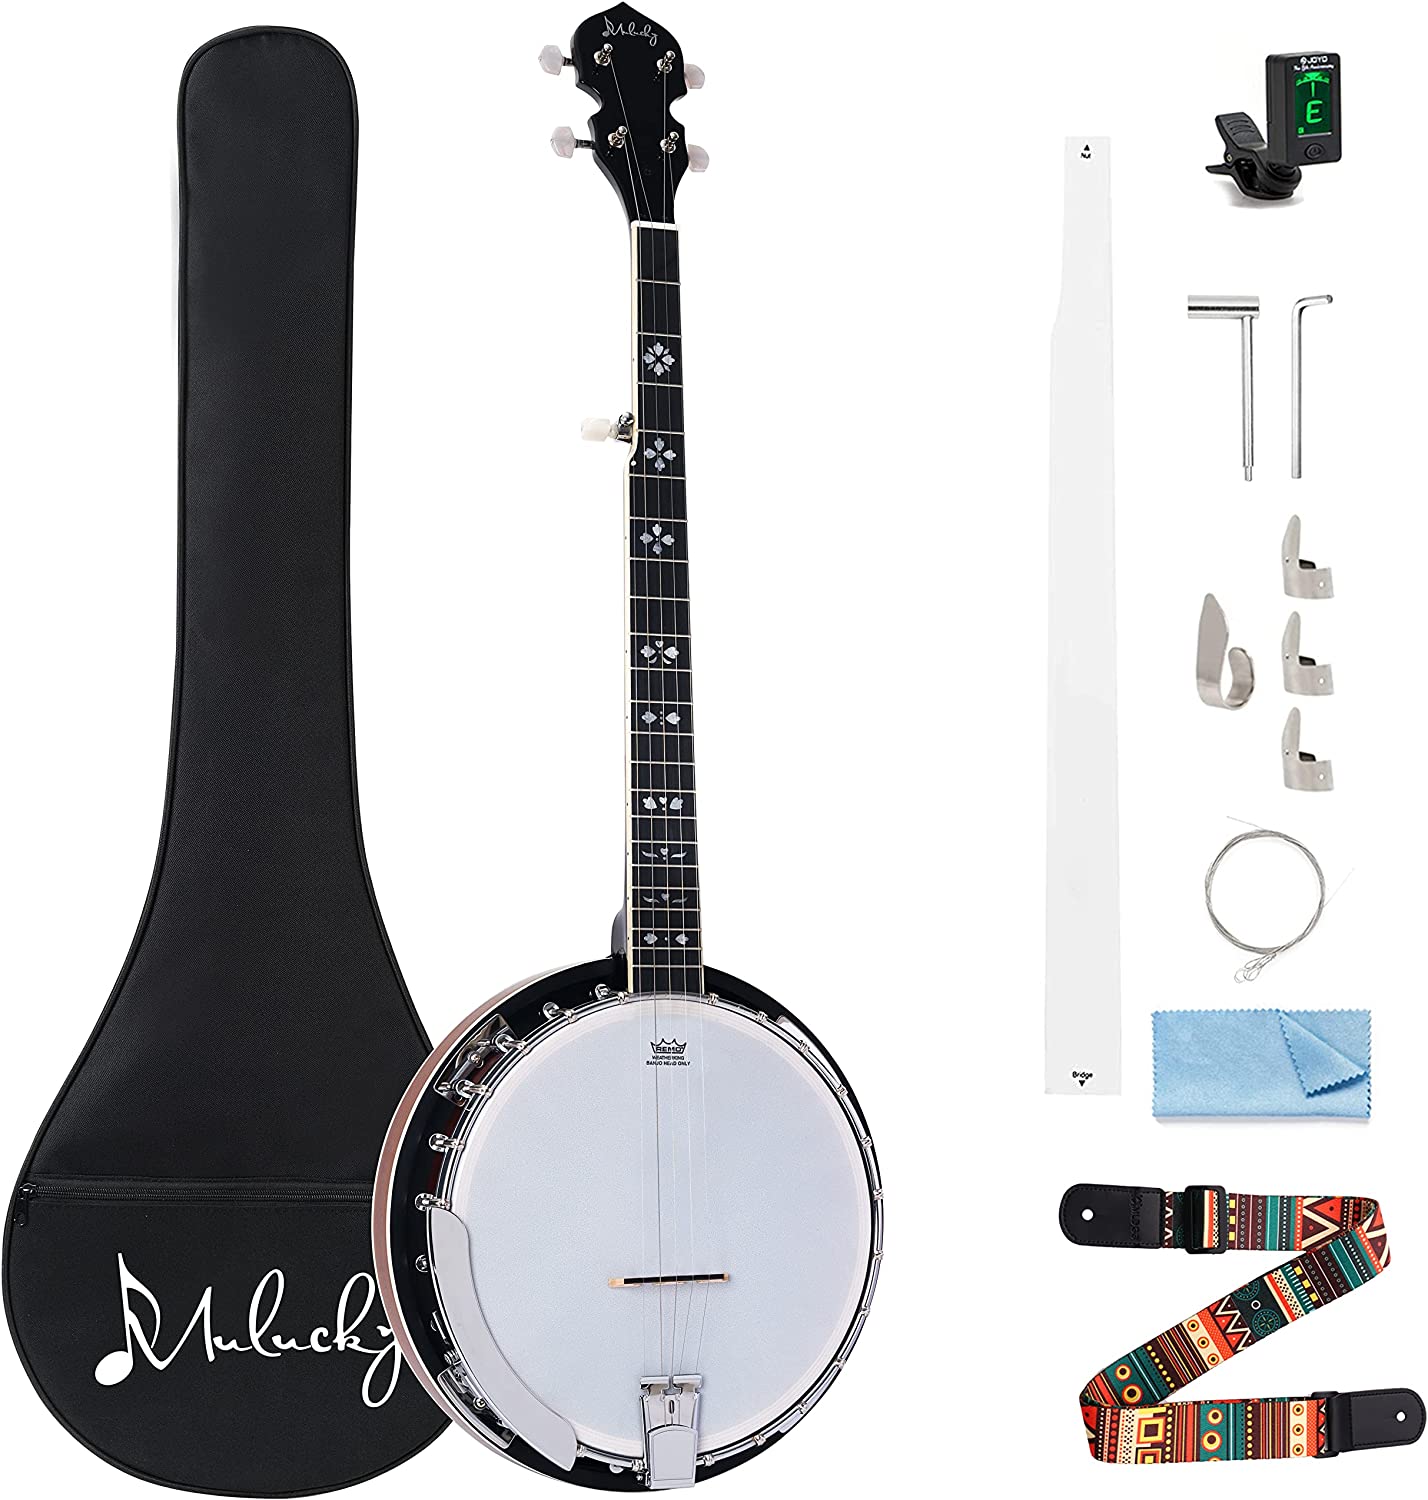 Mulucky 5 String Banjo Large Size What Is the Best Banjo for a Beginner? - Common Questions About the Banjo